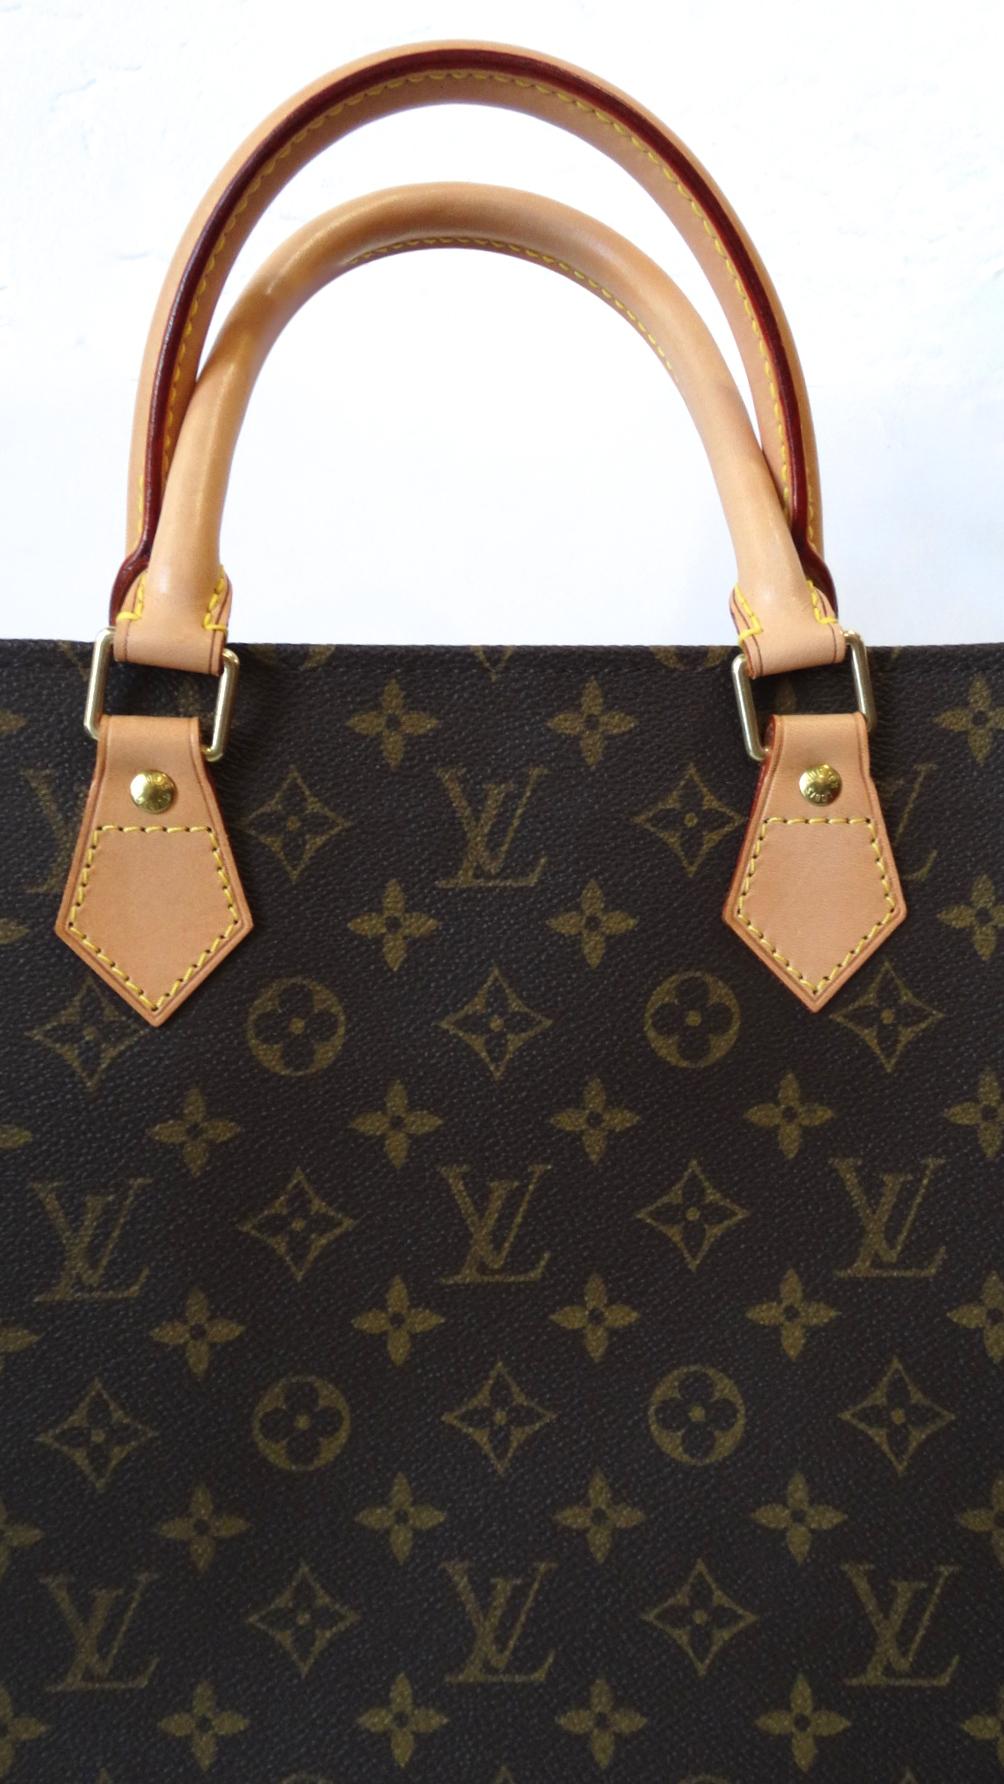 Amazing 2000s Louis Vuitton Sac Plat in none other than the brown Monogram print! This style is no longer available at Louis Vuitton, making this a rare and fun classic to add to your collection! Clean, cream leather interior with several pockets